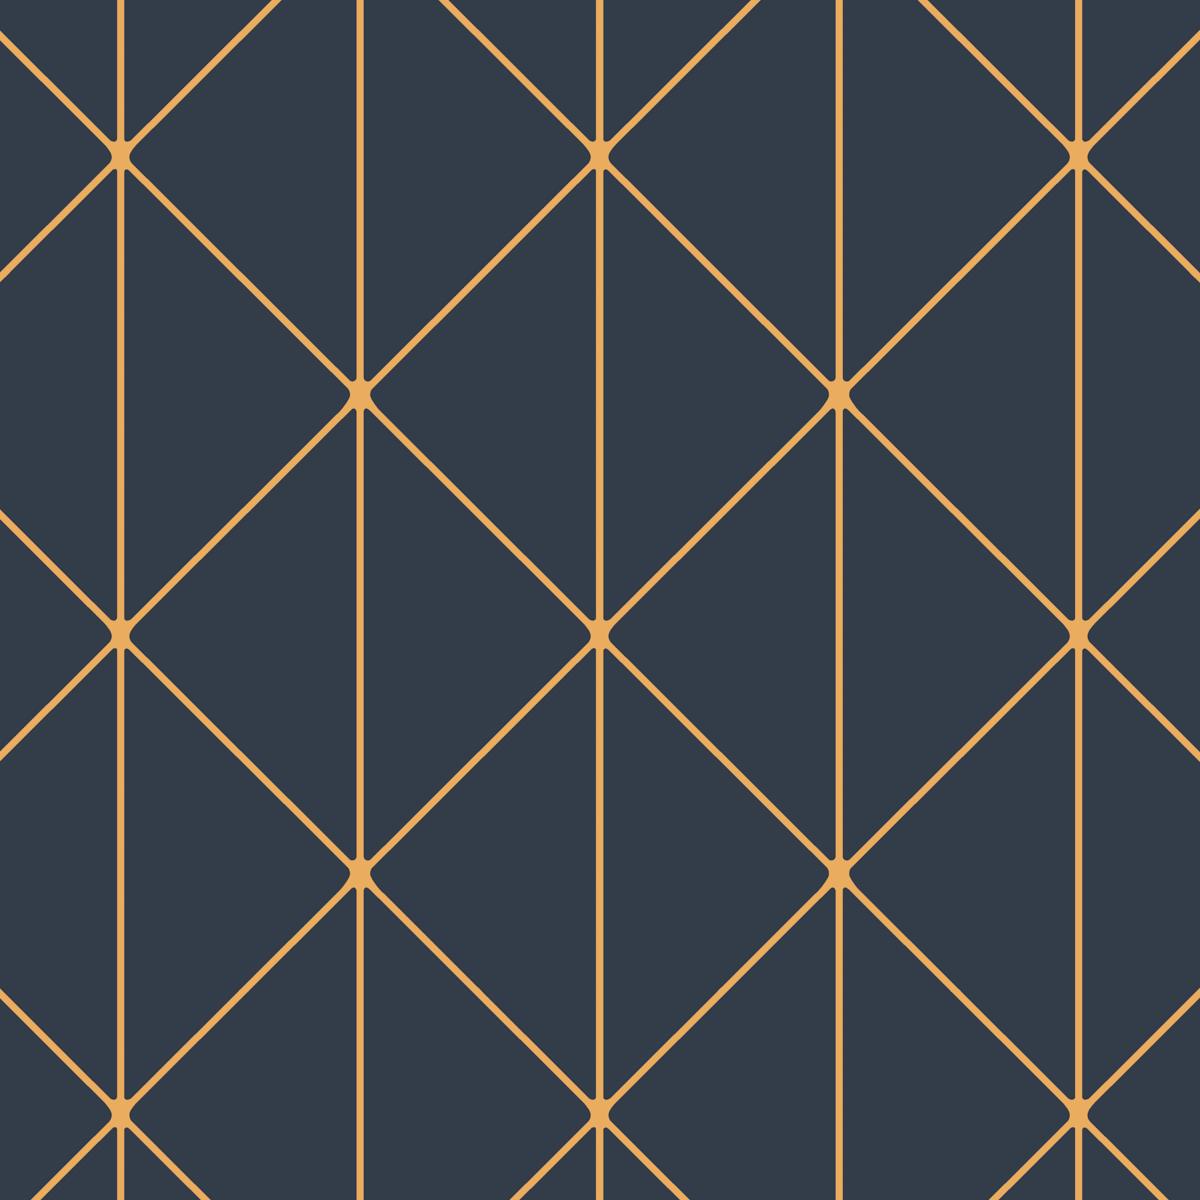 DIAMONDS_NAVY AND GOLD